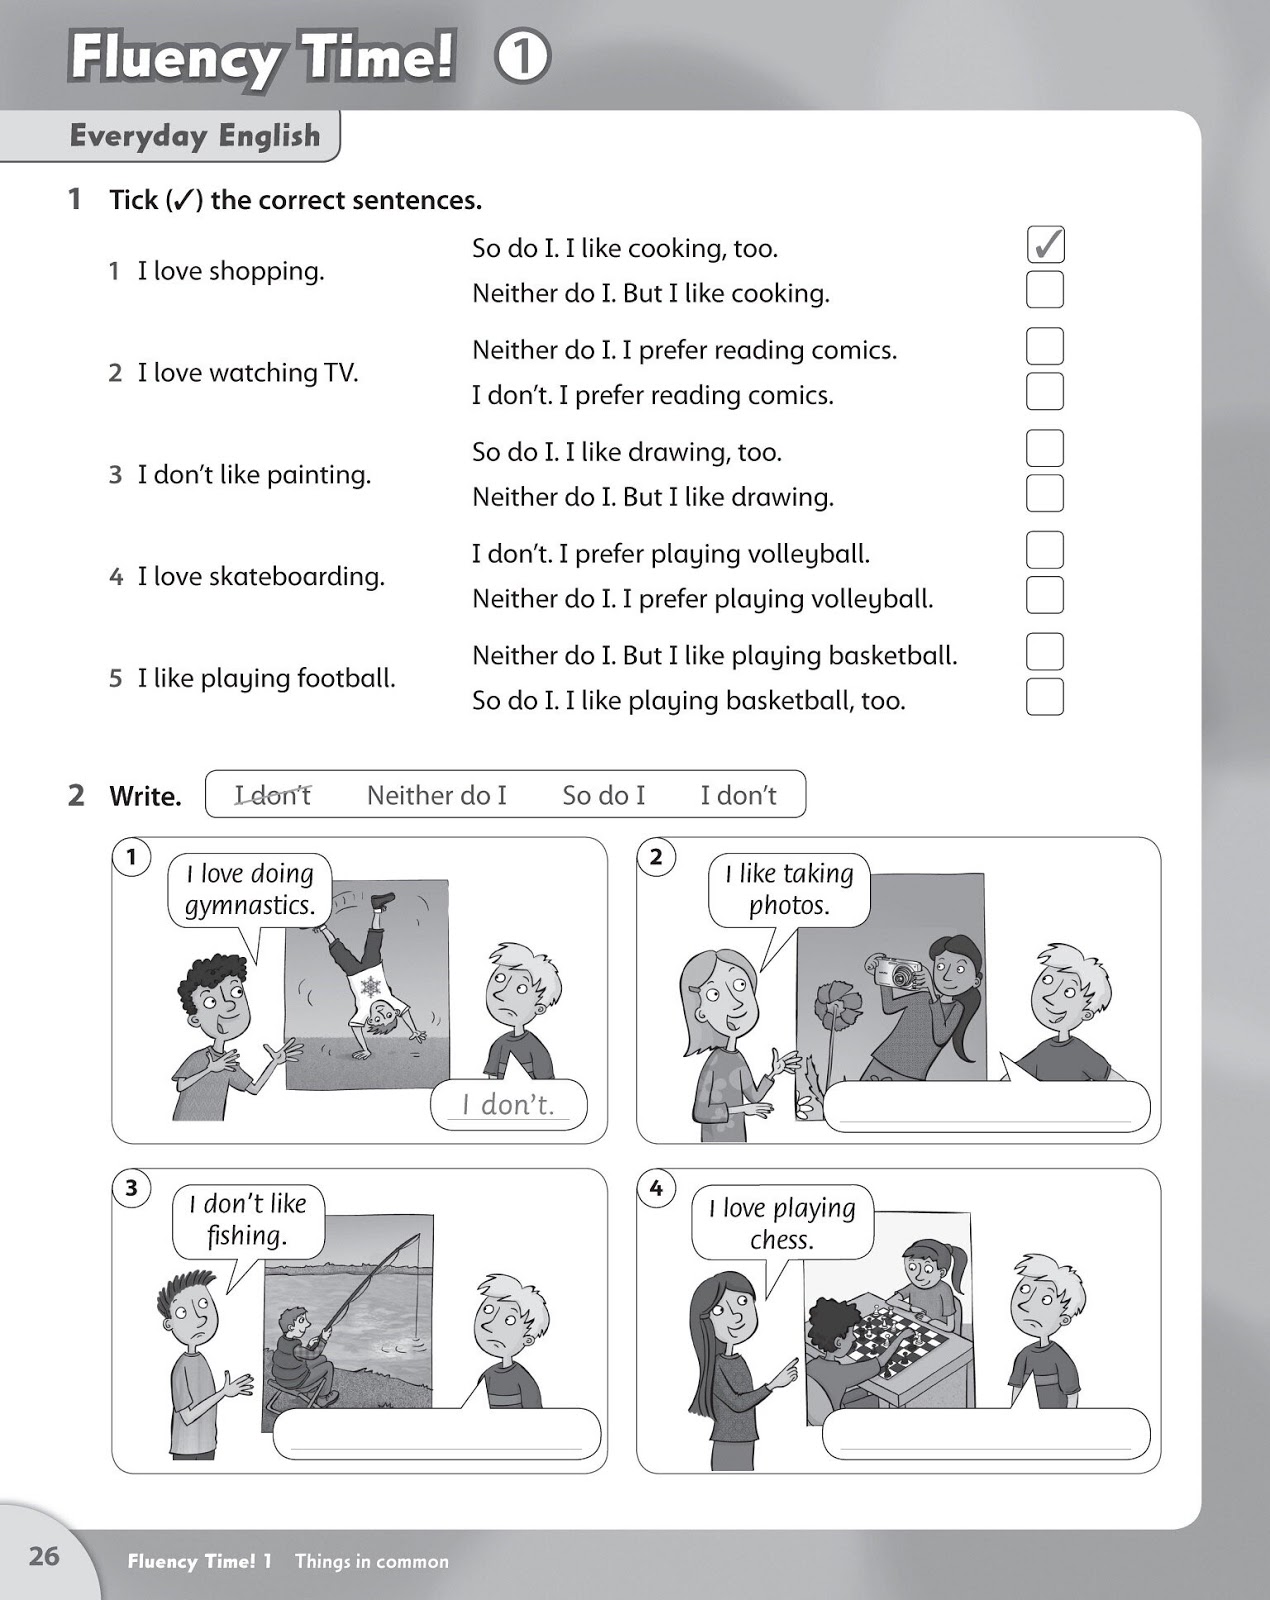 Friends 3 test book. Тетрадь Family and friends 3. Family and friends 1 Fluency time 2. Гдз Family and friends 2 Workbook 3 класс. Family and friends 3 Workbook ответы 4.